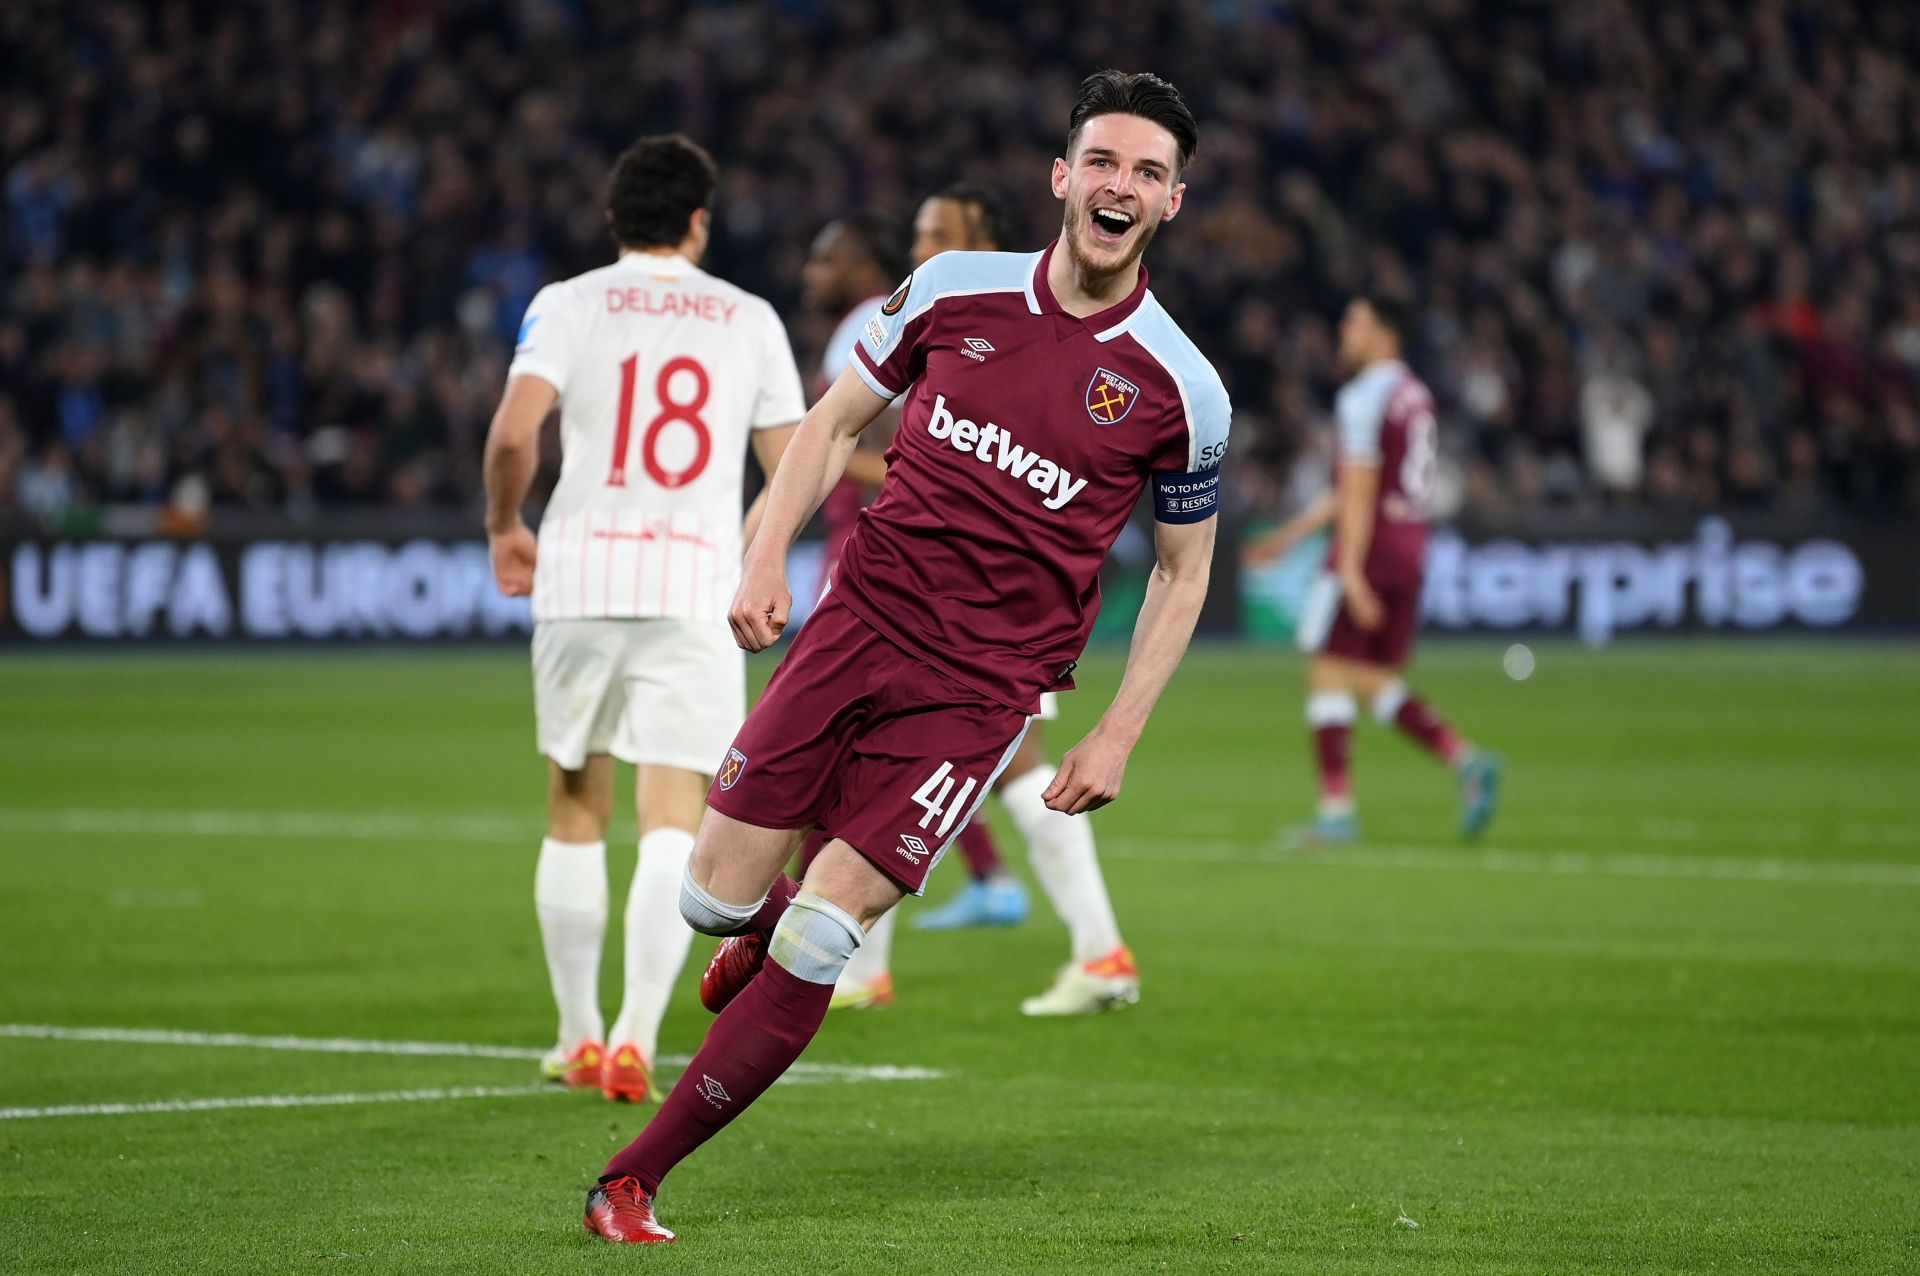 Declan Rice is one of the rising stars of the Premier League.